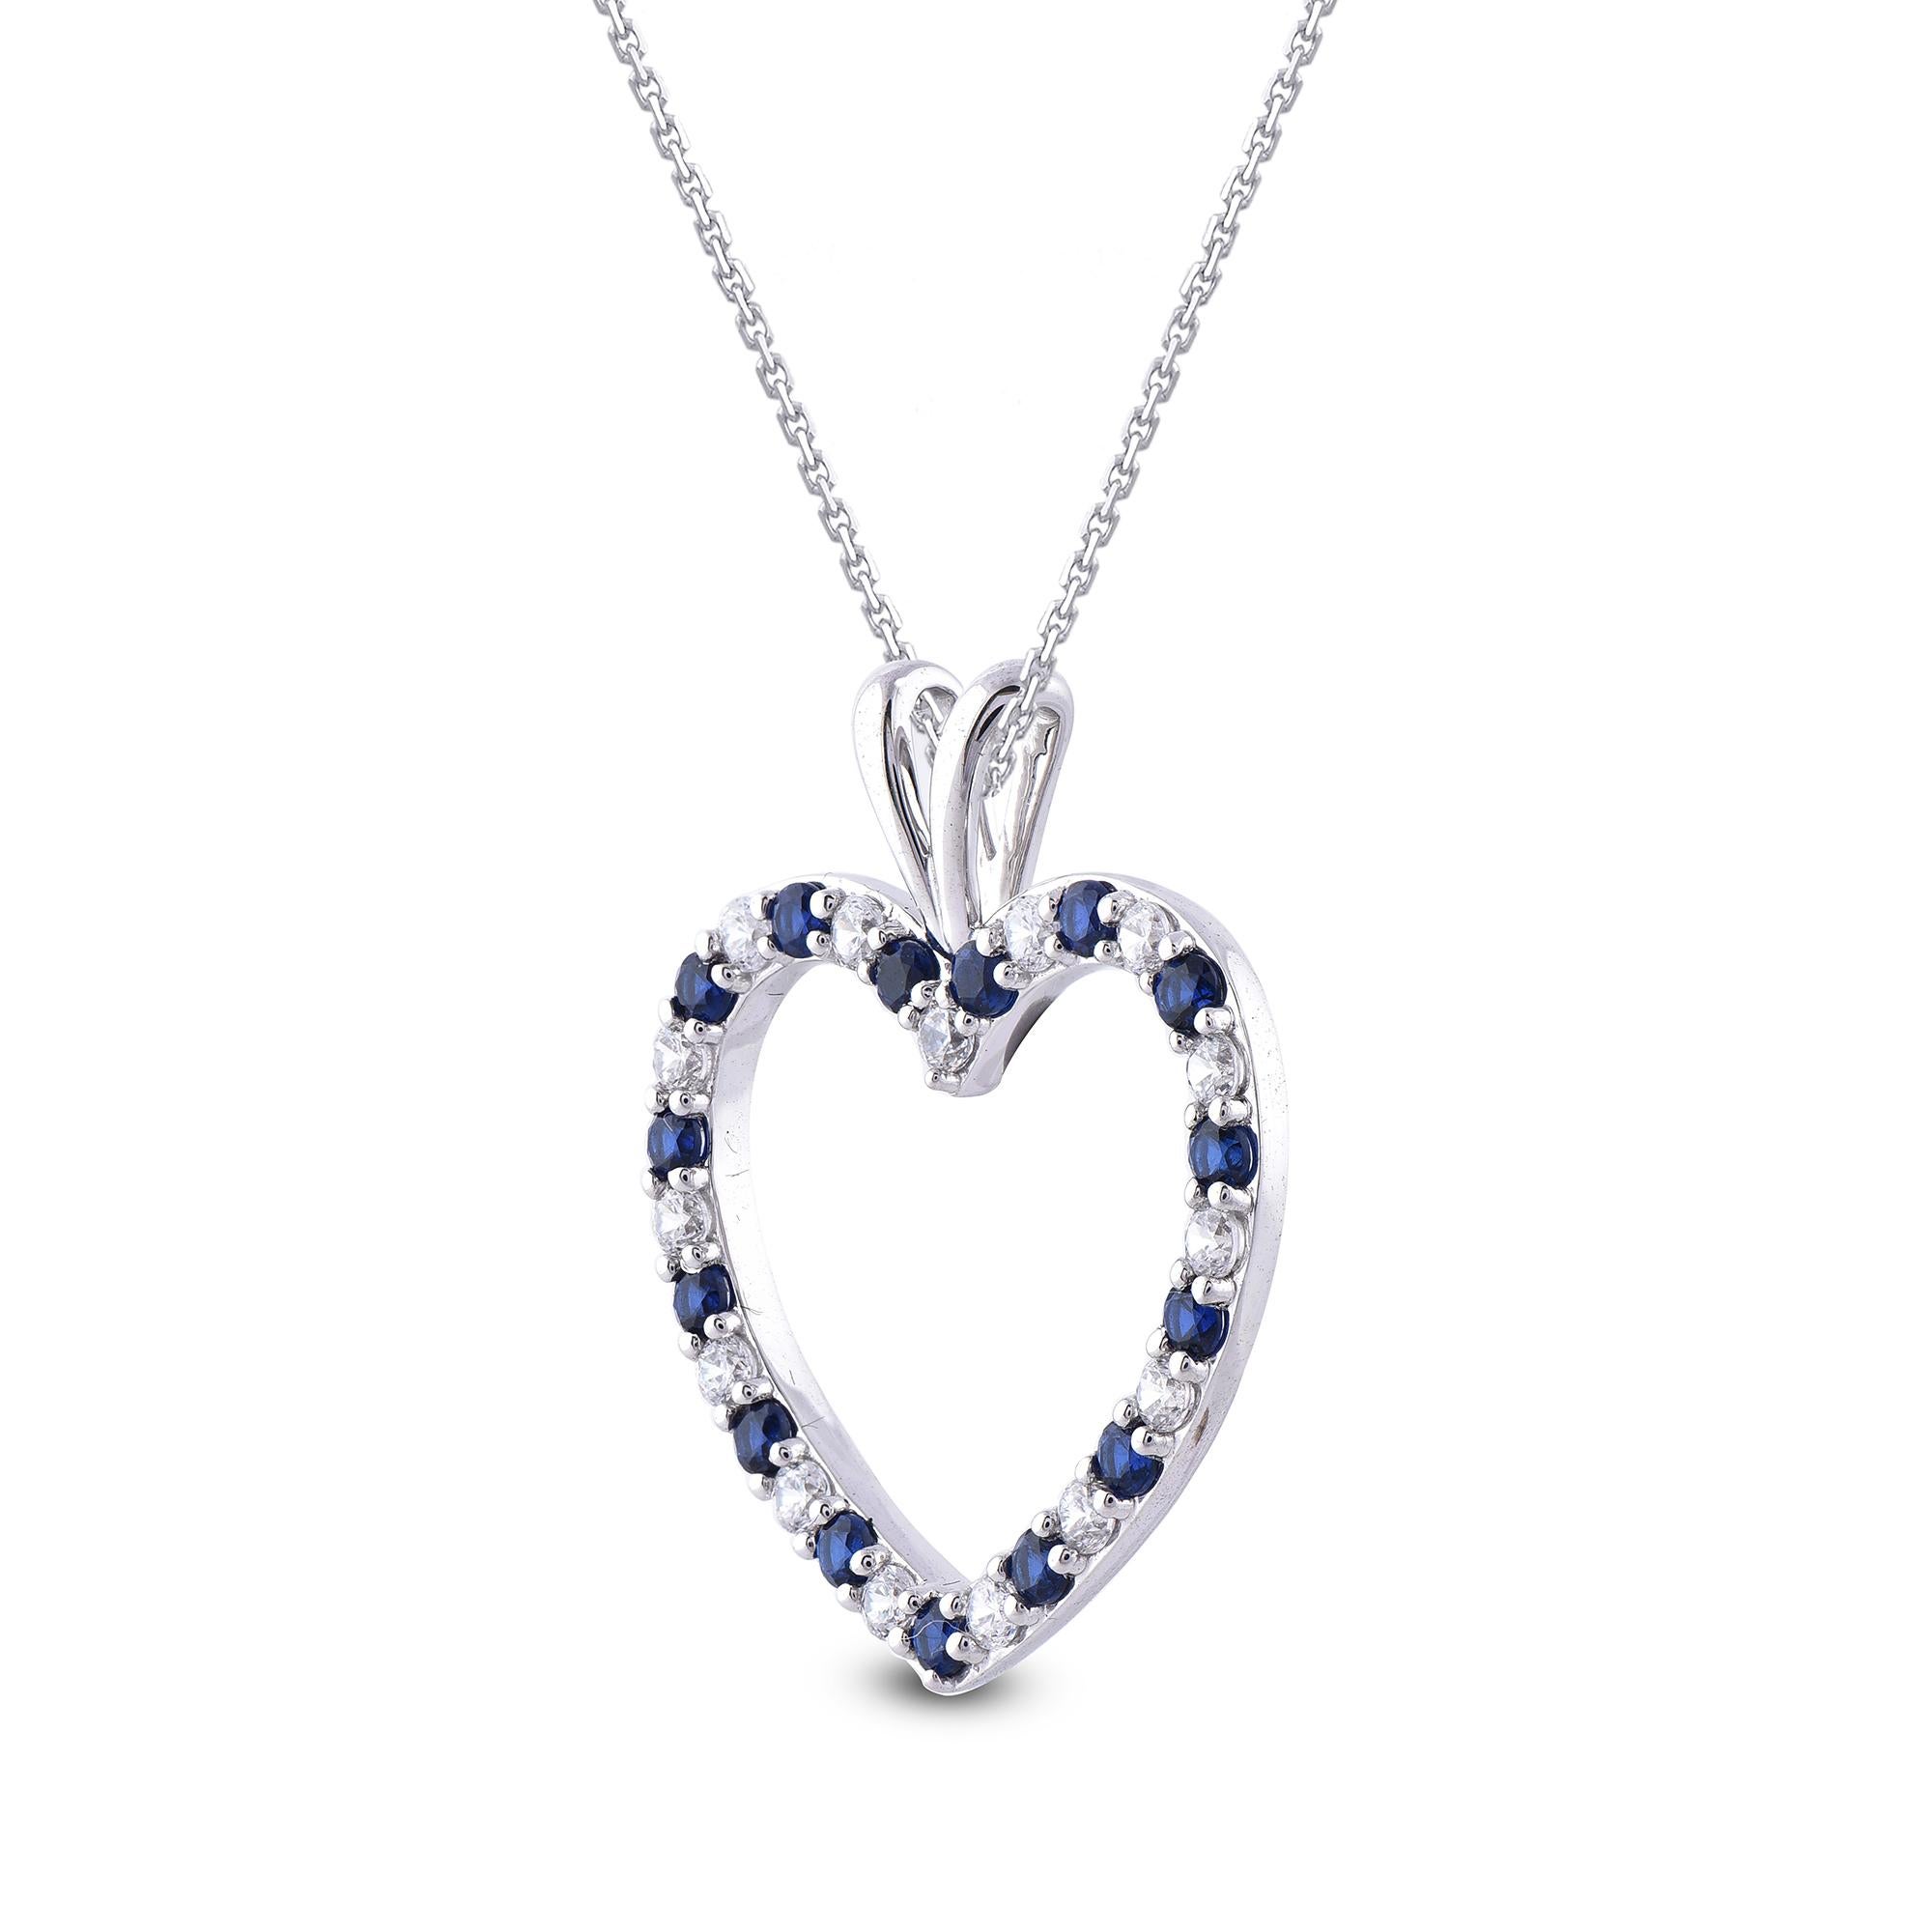 Why blend in when you can stand out with this beautiful diamond and blue sapphire studded heart pendant. The pendant is crafted from 14 karat white gold yellow, and features 15 white diamonds and 15 blue sapphire set in prong setting, H-I color I2